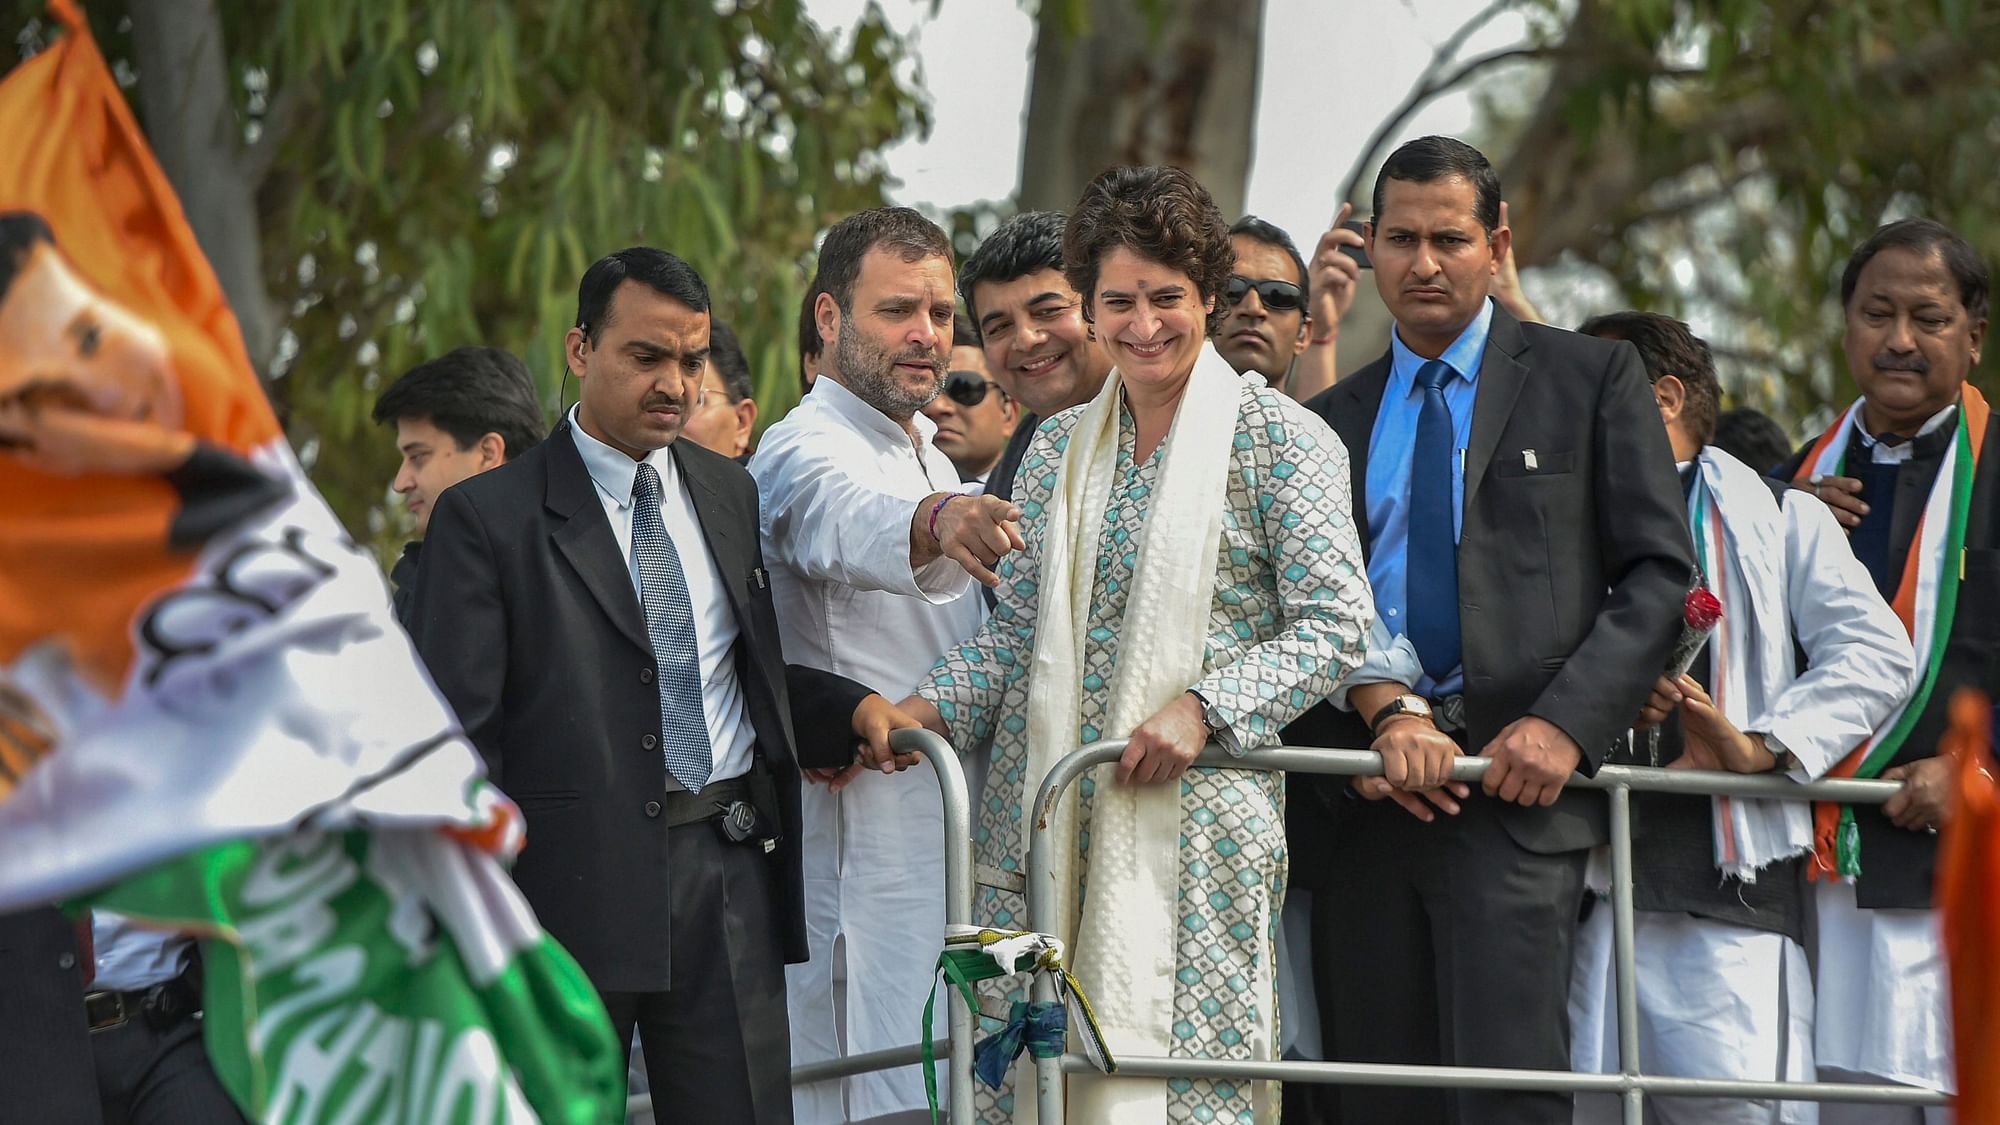 All India Congress Committee (AICC) General Secretary of Uttar Pradesh East, Priyanka Gandhi Vadra, with Congress President Rahul Gandhi during the roadshow, in Lucknow. File picture.